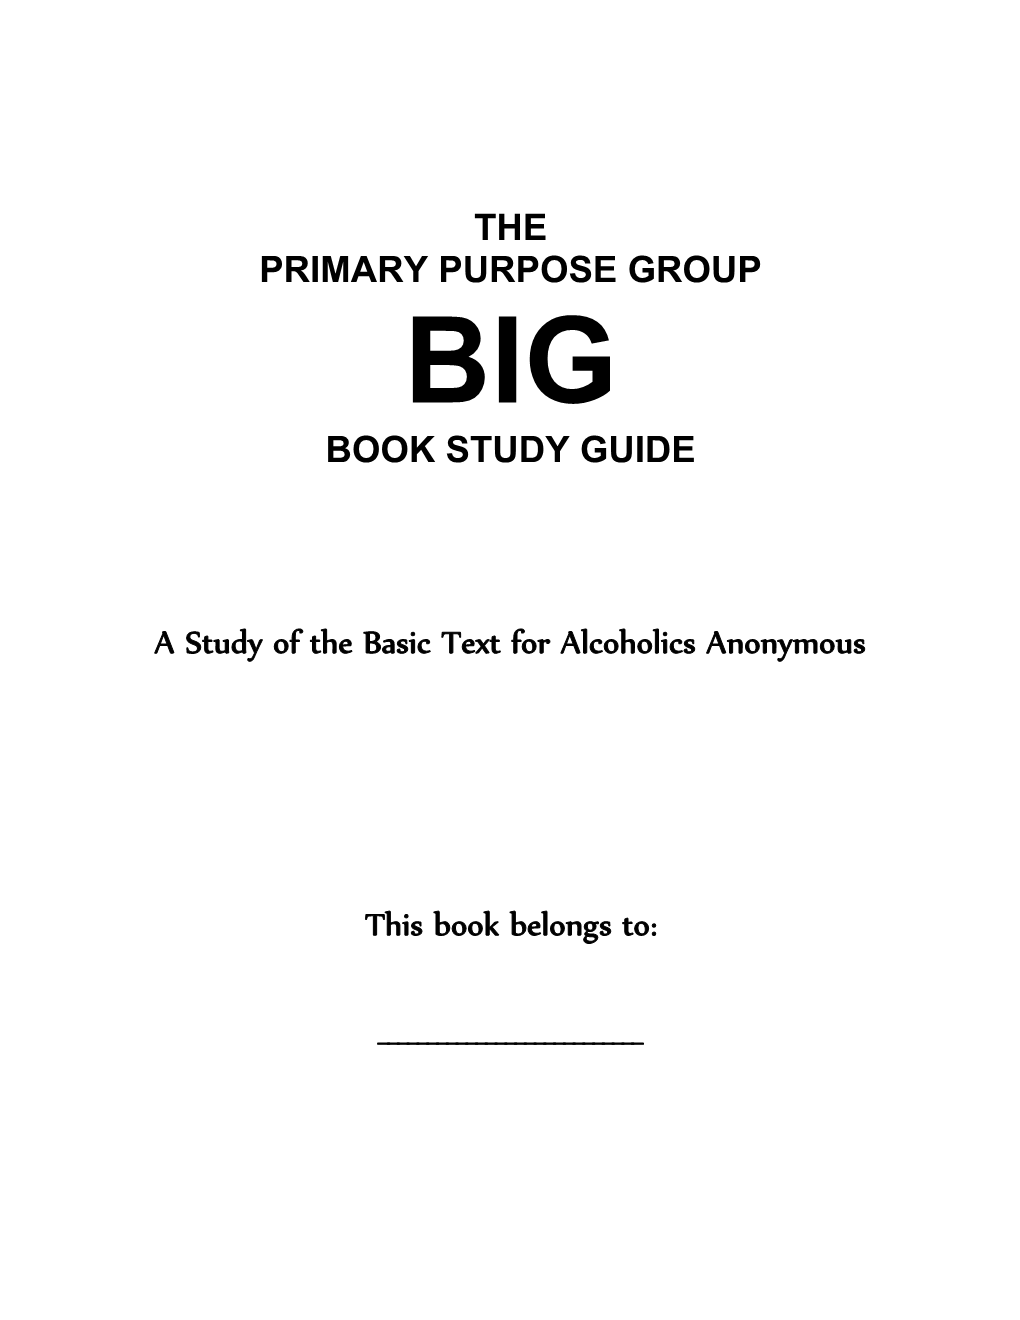 A Study of the Basic Text for Alcoholics Anonymous